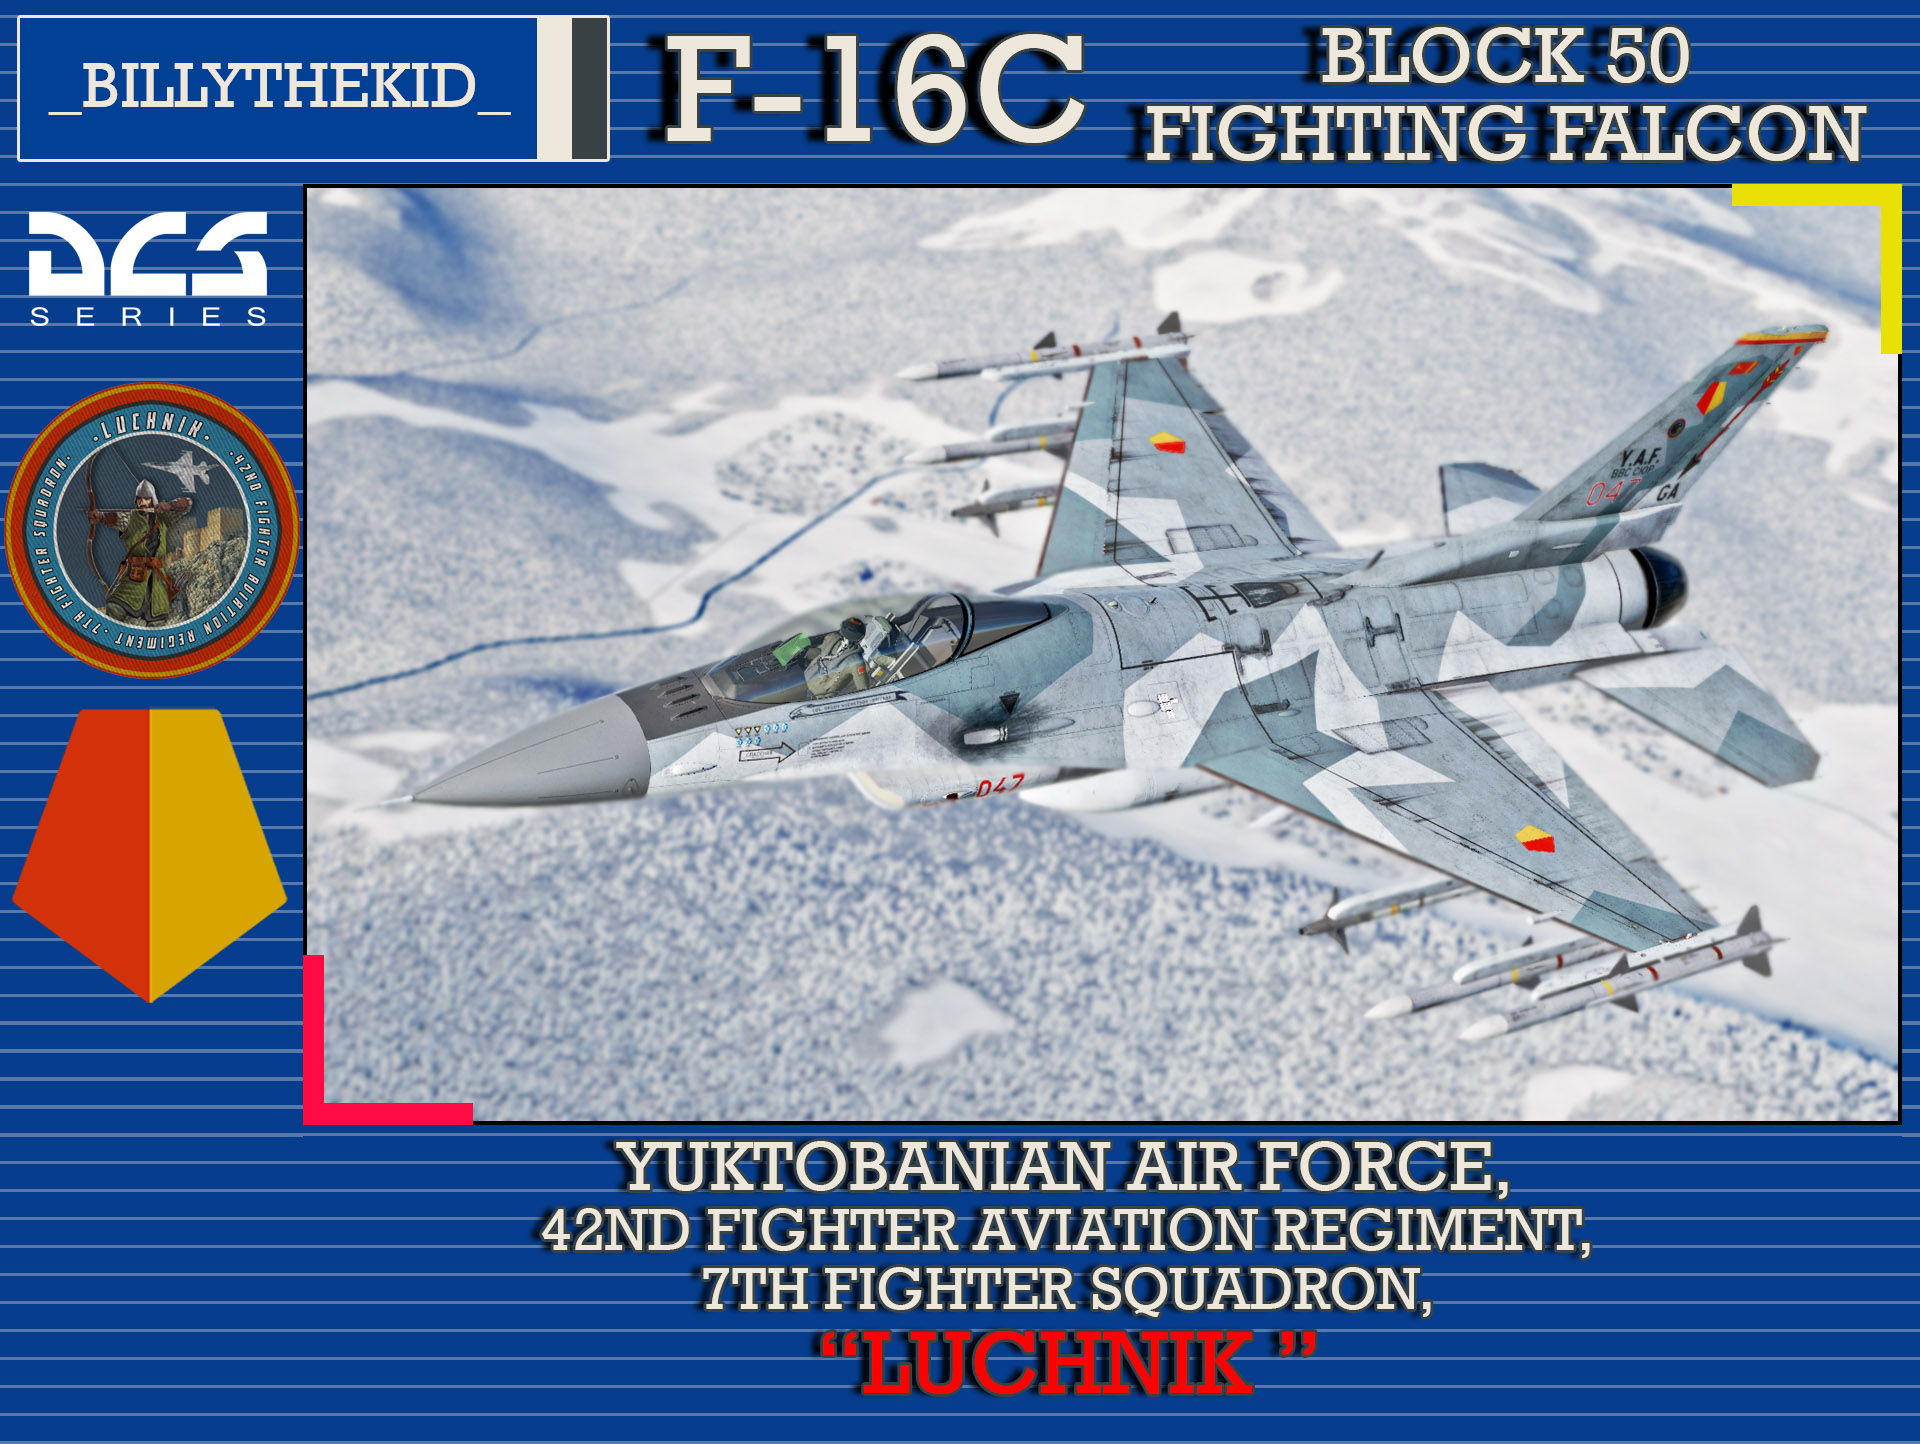 Ace Combat - Yuktobanian Air Force - 42nd Fighter Aviation Regiment - 7th Fighter Squadron "Luchnik" F-16C Block 50 Fighting Falcon